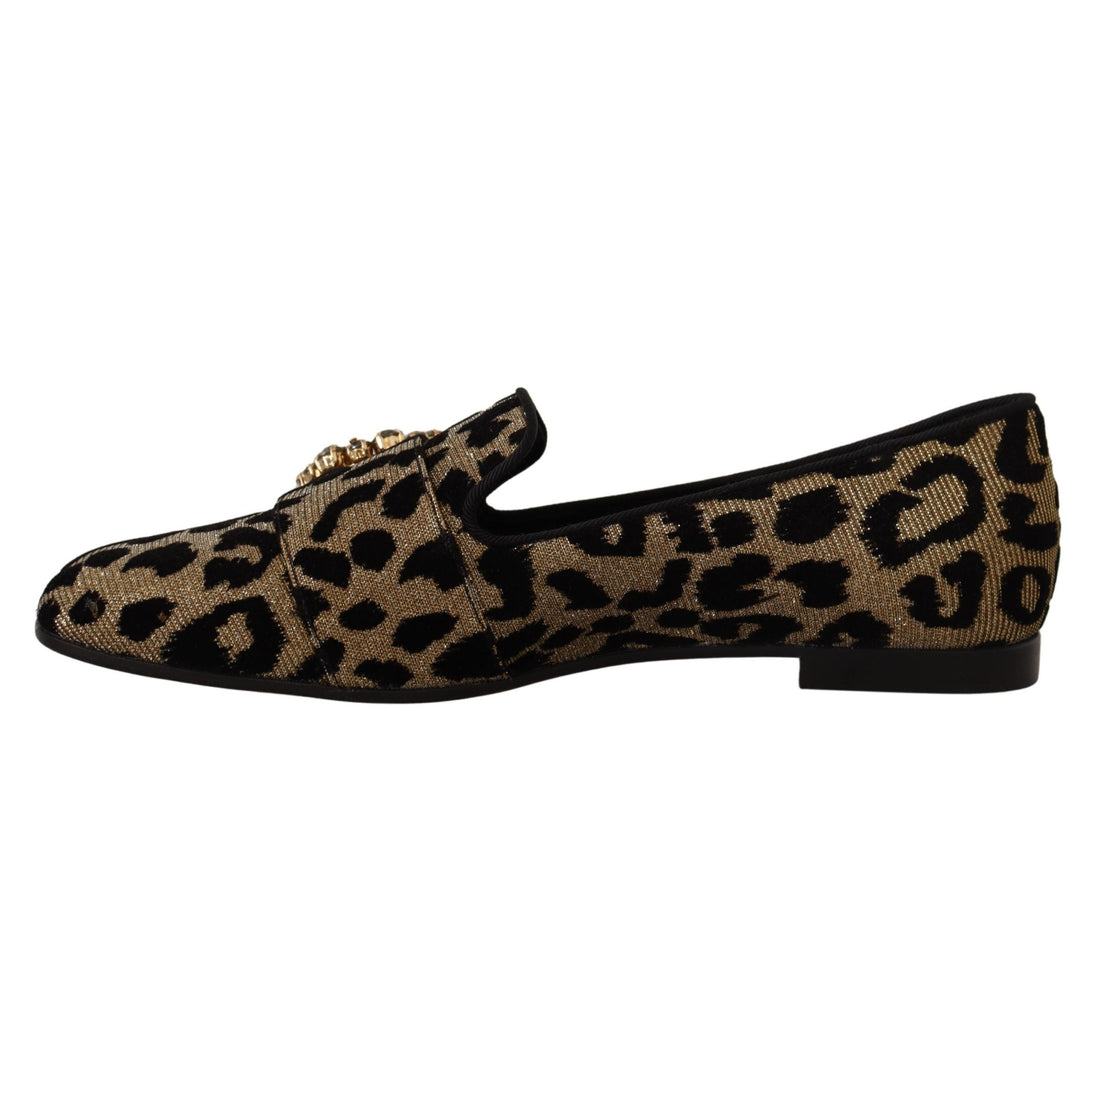 Dolce & Gabbana Gold Leopard Print Crystals Loafers Shoes